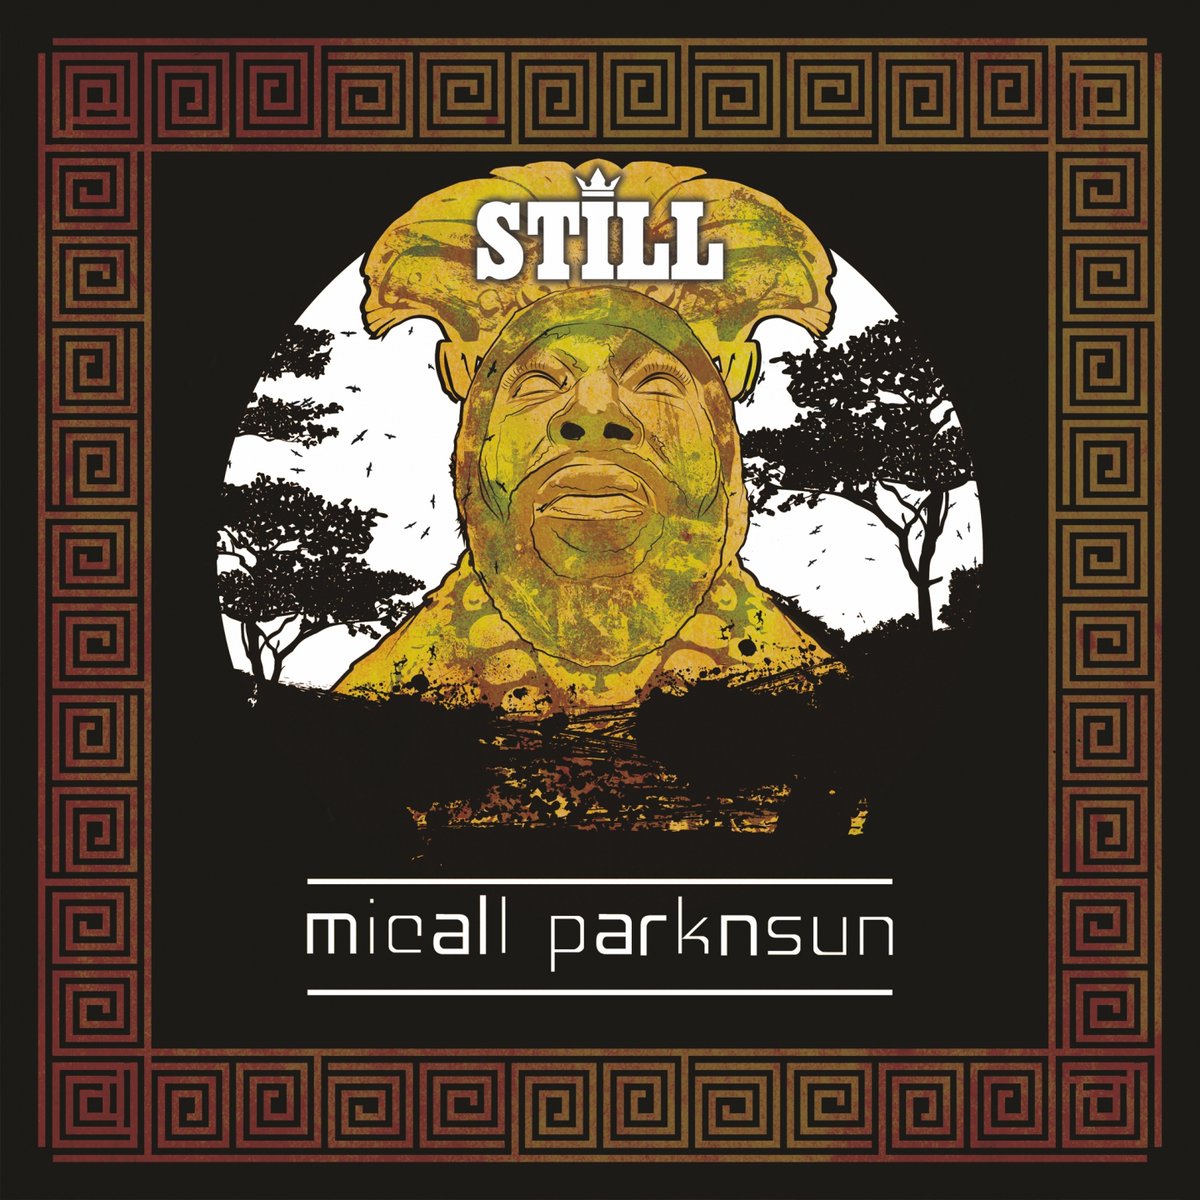 Congratulations to one of my big brothers in Rap, @MicallParknsun, on the release of his new album, #STILL - OUT NOW on @BootRecordsUK! Buy directly from The Working Class Dad and turn the music up LOUD. Pre-order your CDs and vinyl today! 🔗 bootrecords.bandcamp.com/album/still